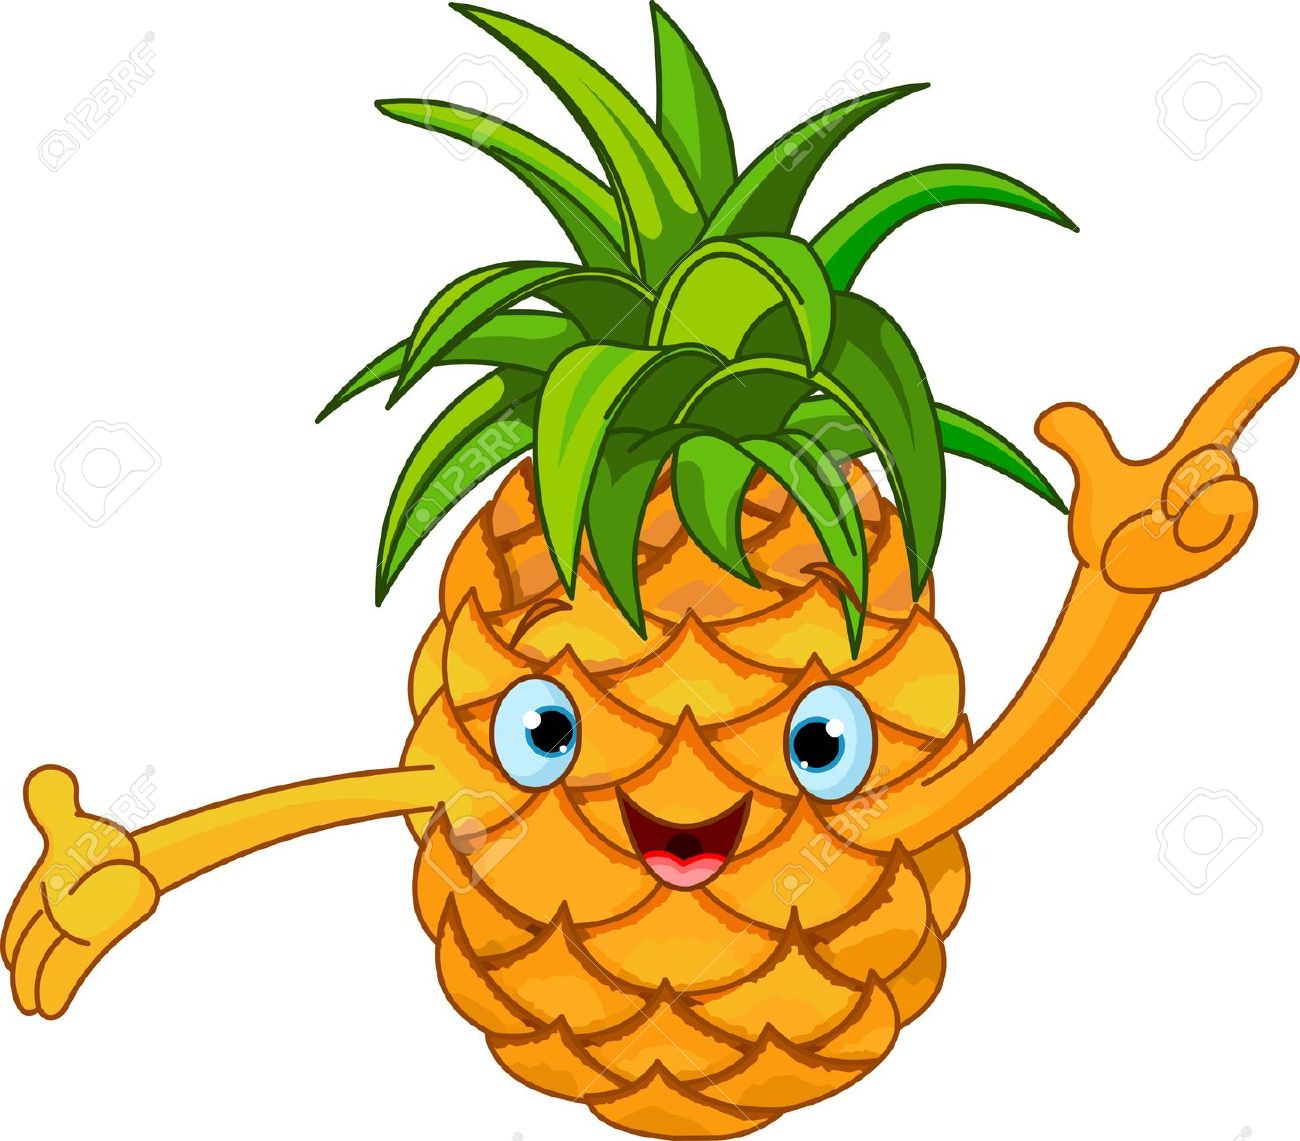 clipart of pineapple - photo #25